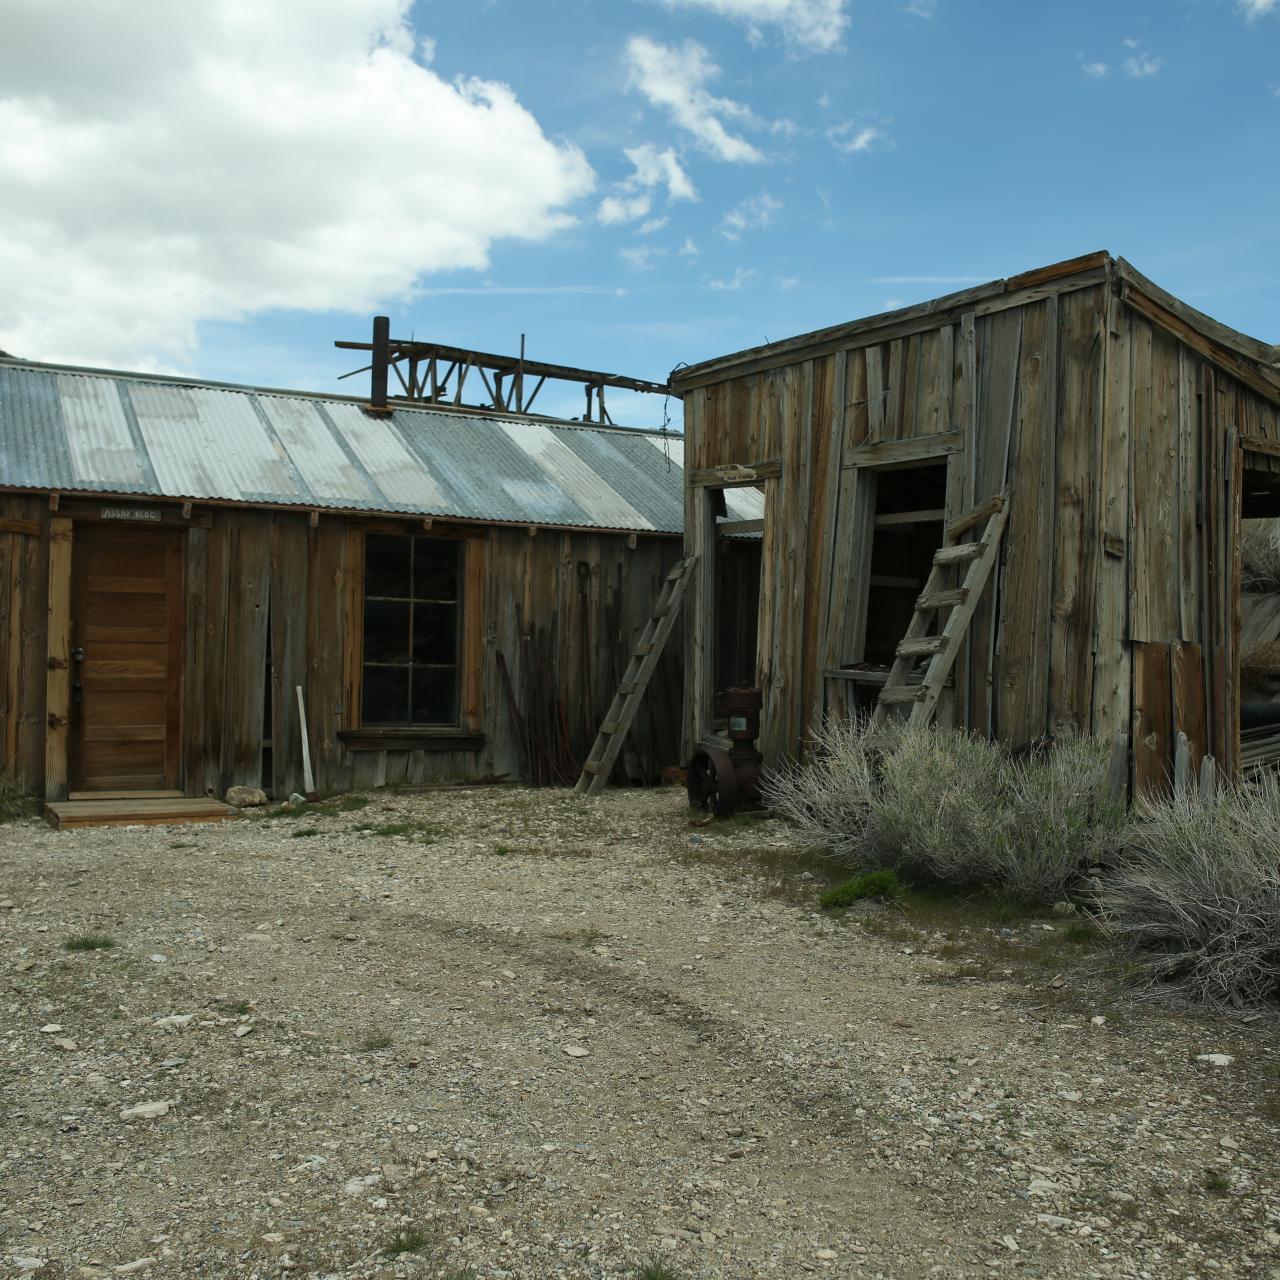 They Bought a Ghost Town for $1.4 Million. Now They Want to Revive It. -  The New York Times